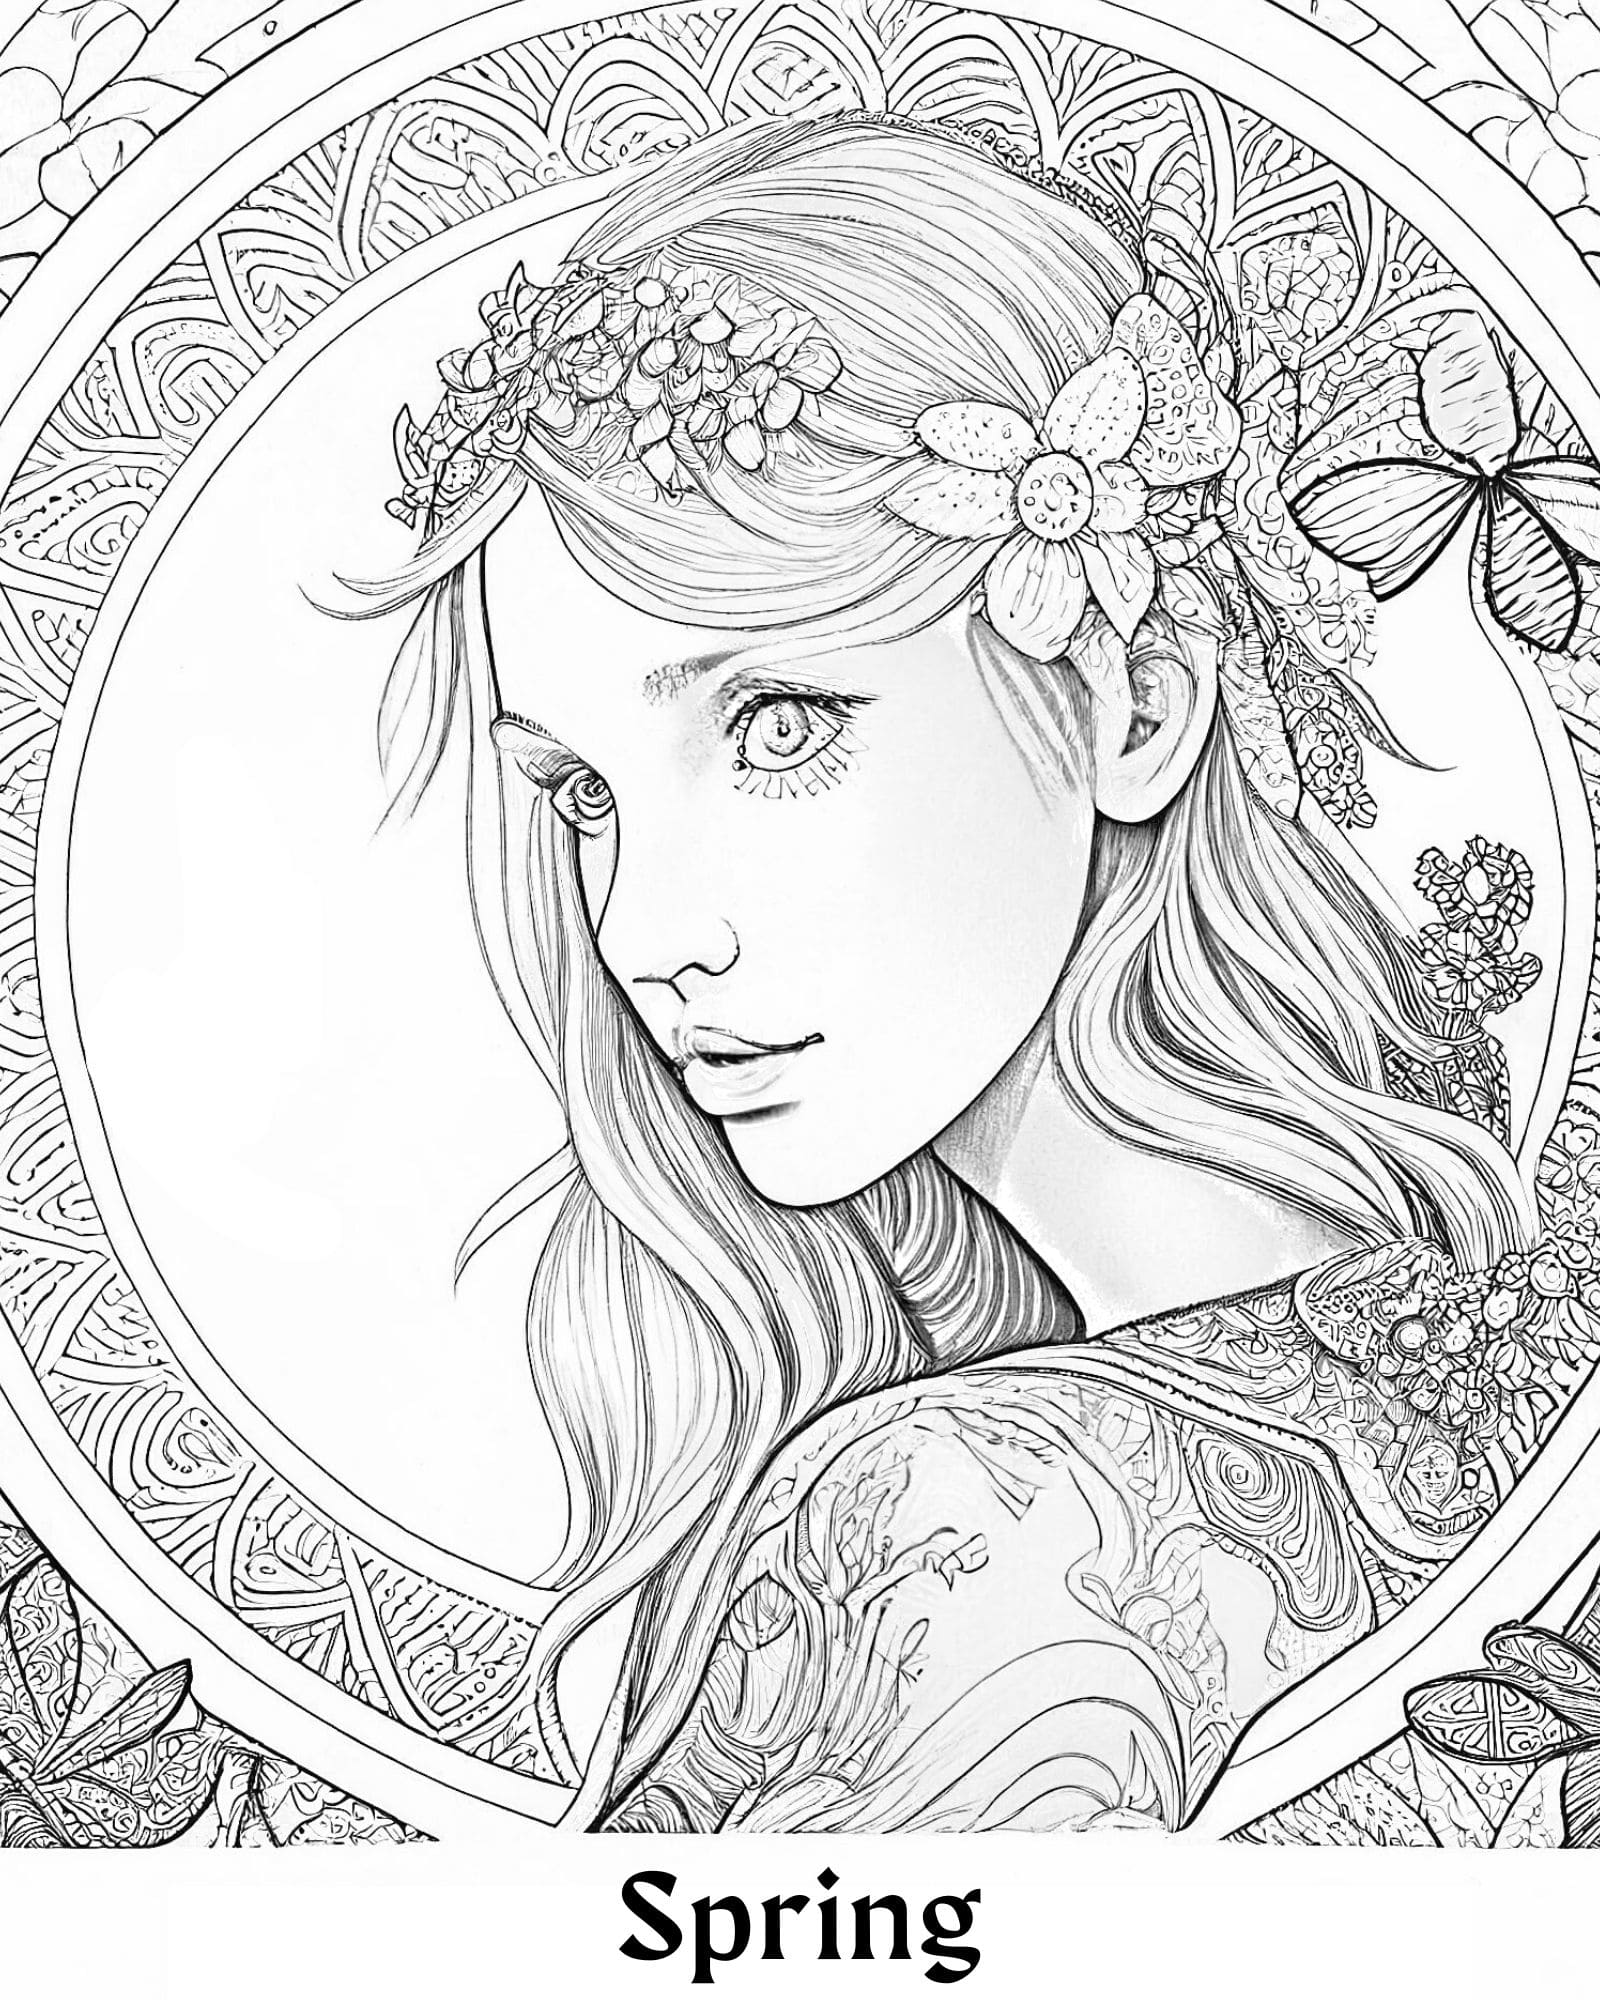 23 Fascinating Fairy Coloring Pages For Adults - Our Mindful Life